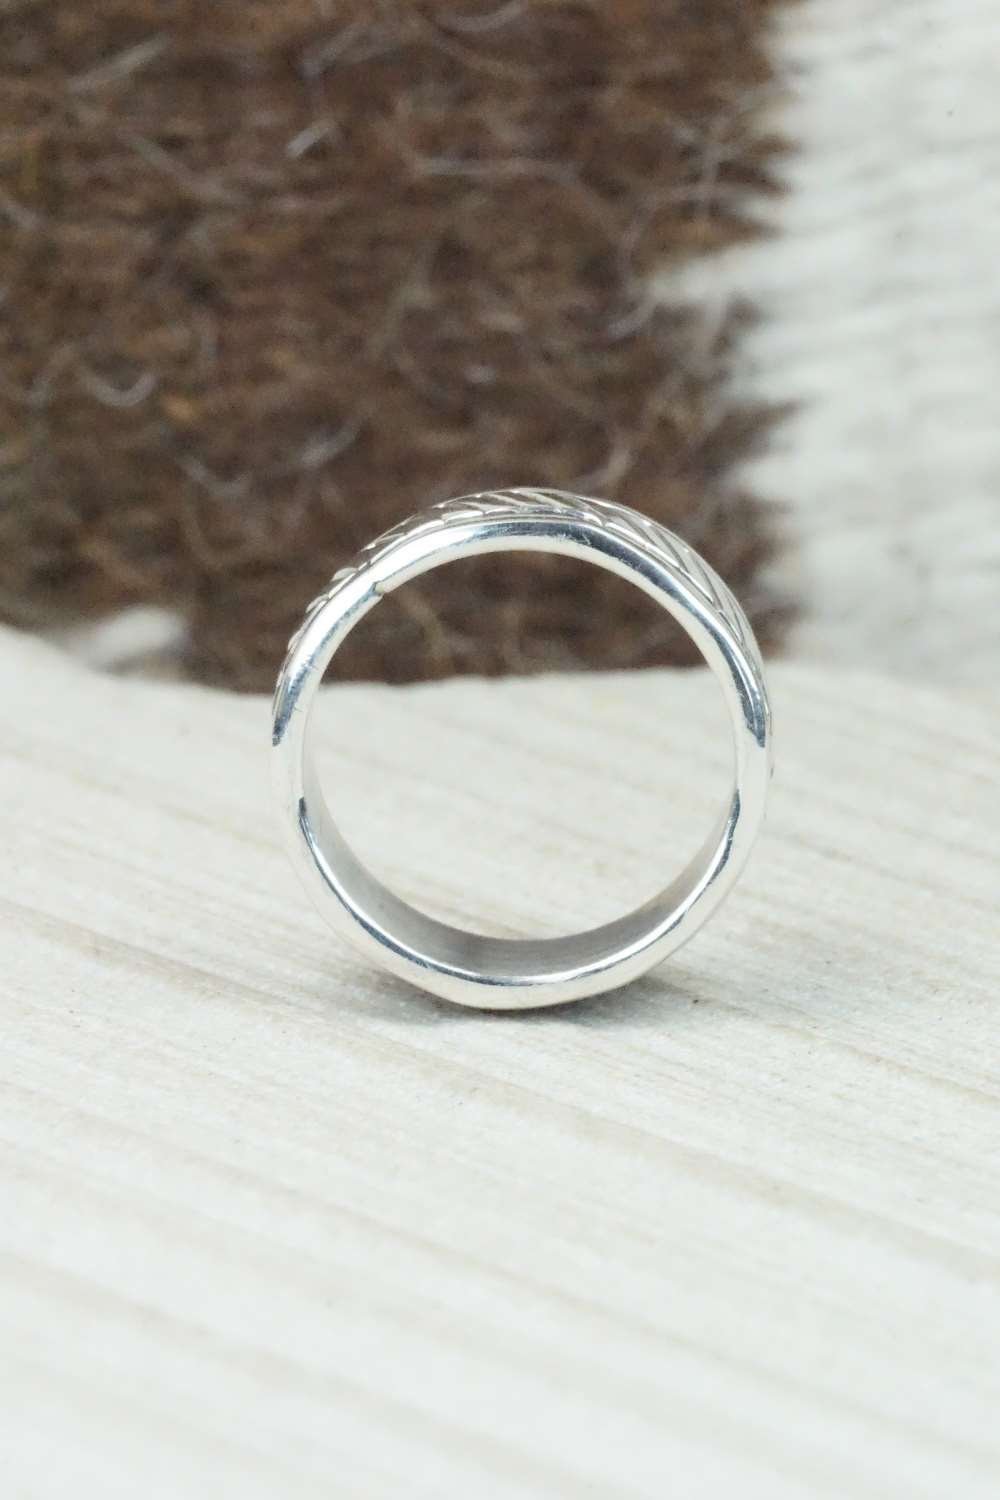 Sterling Silver Ring - Bruce Morgan - Size 5.75